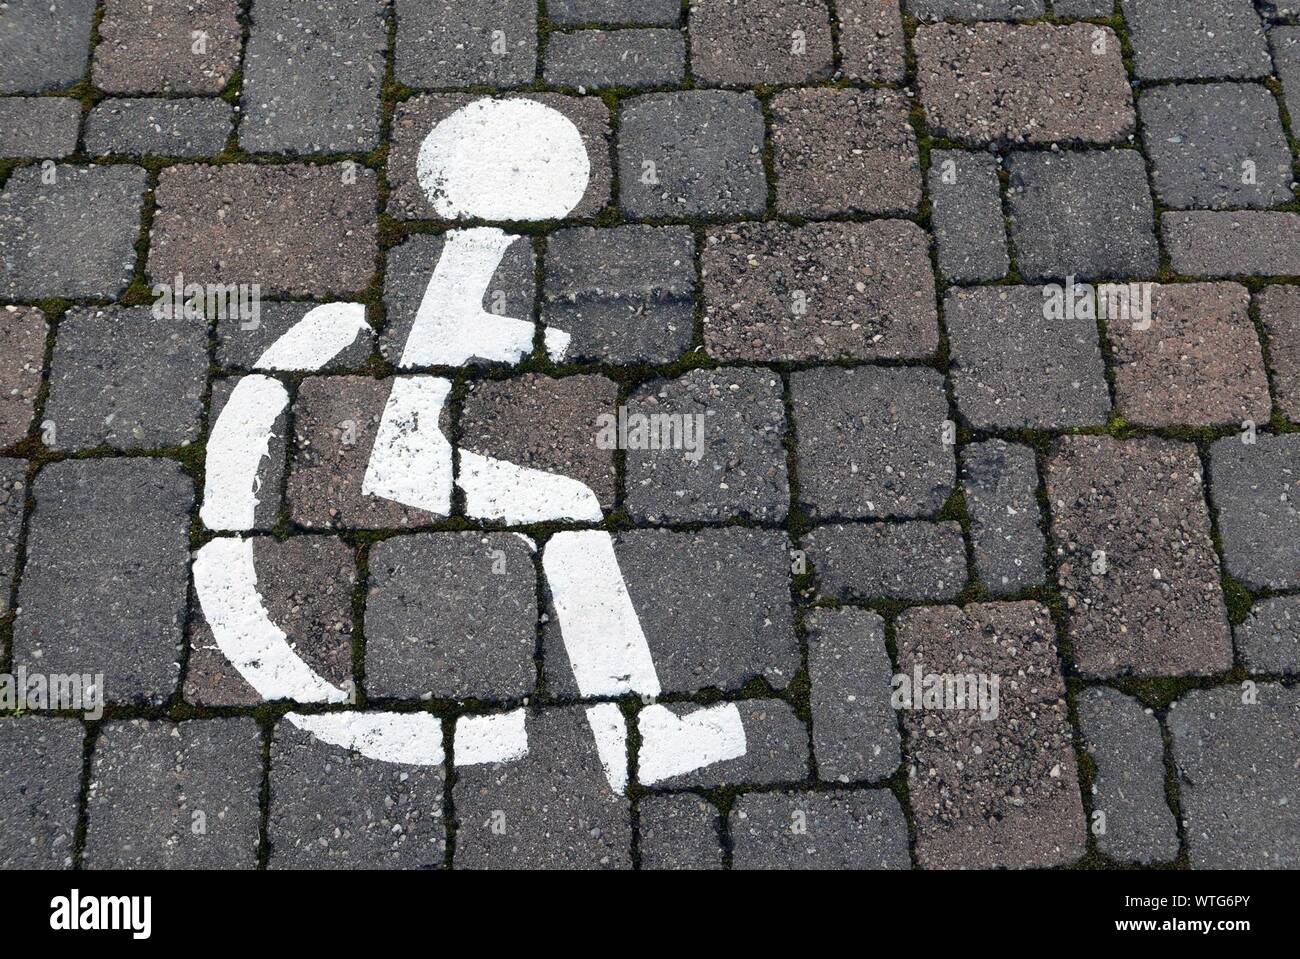 High Angle View Of Pedestrian Handicapped Sign On Road Stock Photo